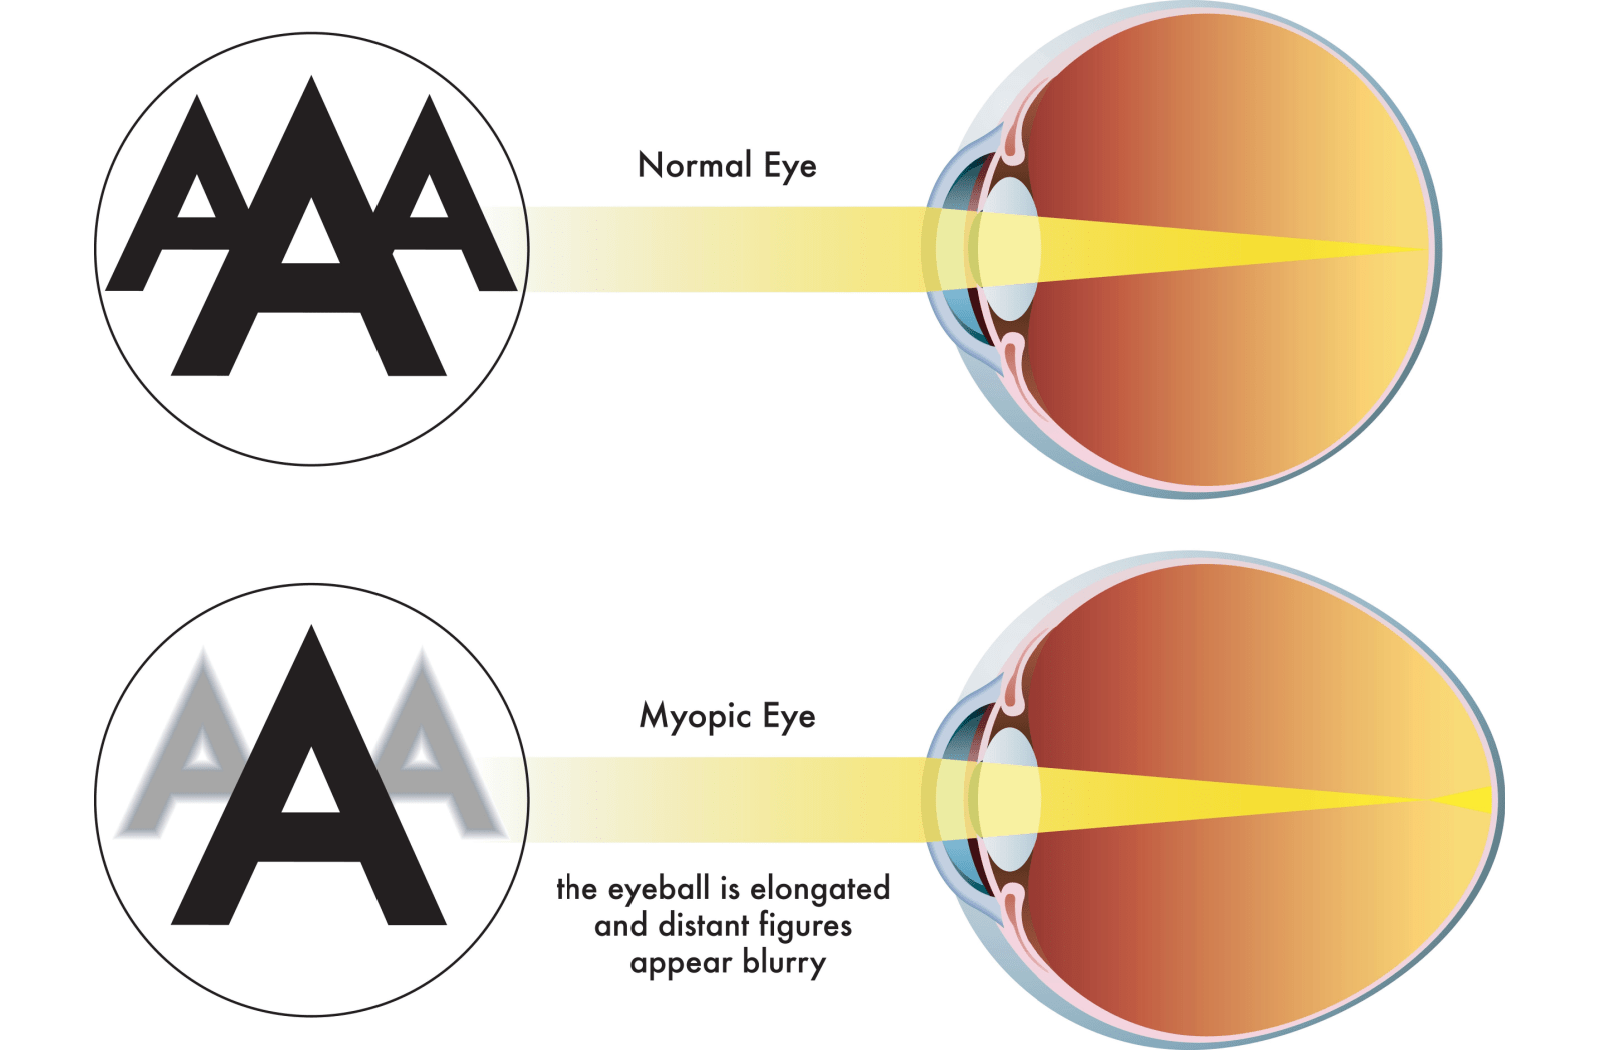 A diagram showing how the light shines in a normal eye, compared to a myopic eye. People with myopia cannot see distant objects very well because the eyeball is elongated